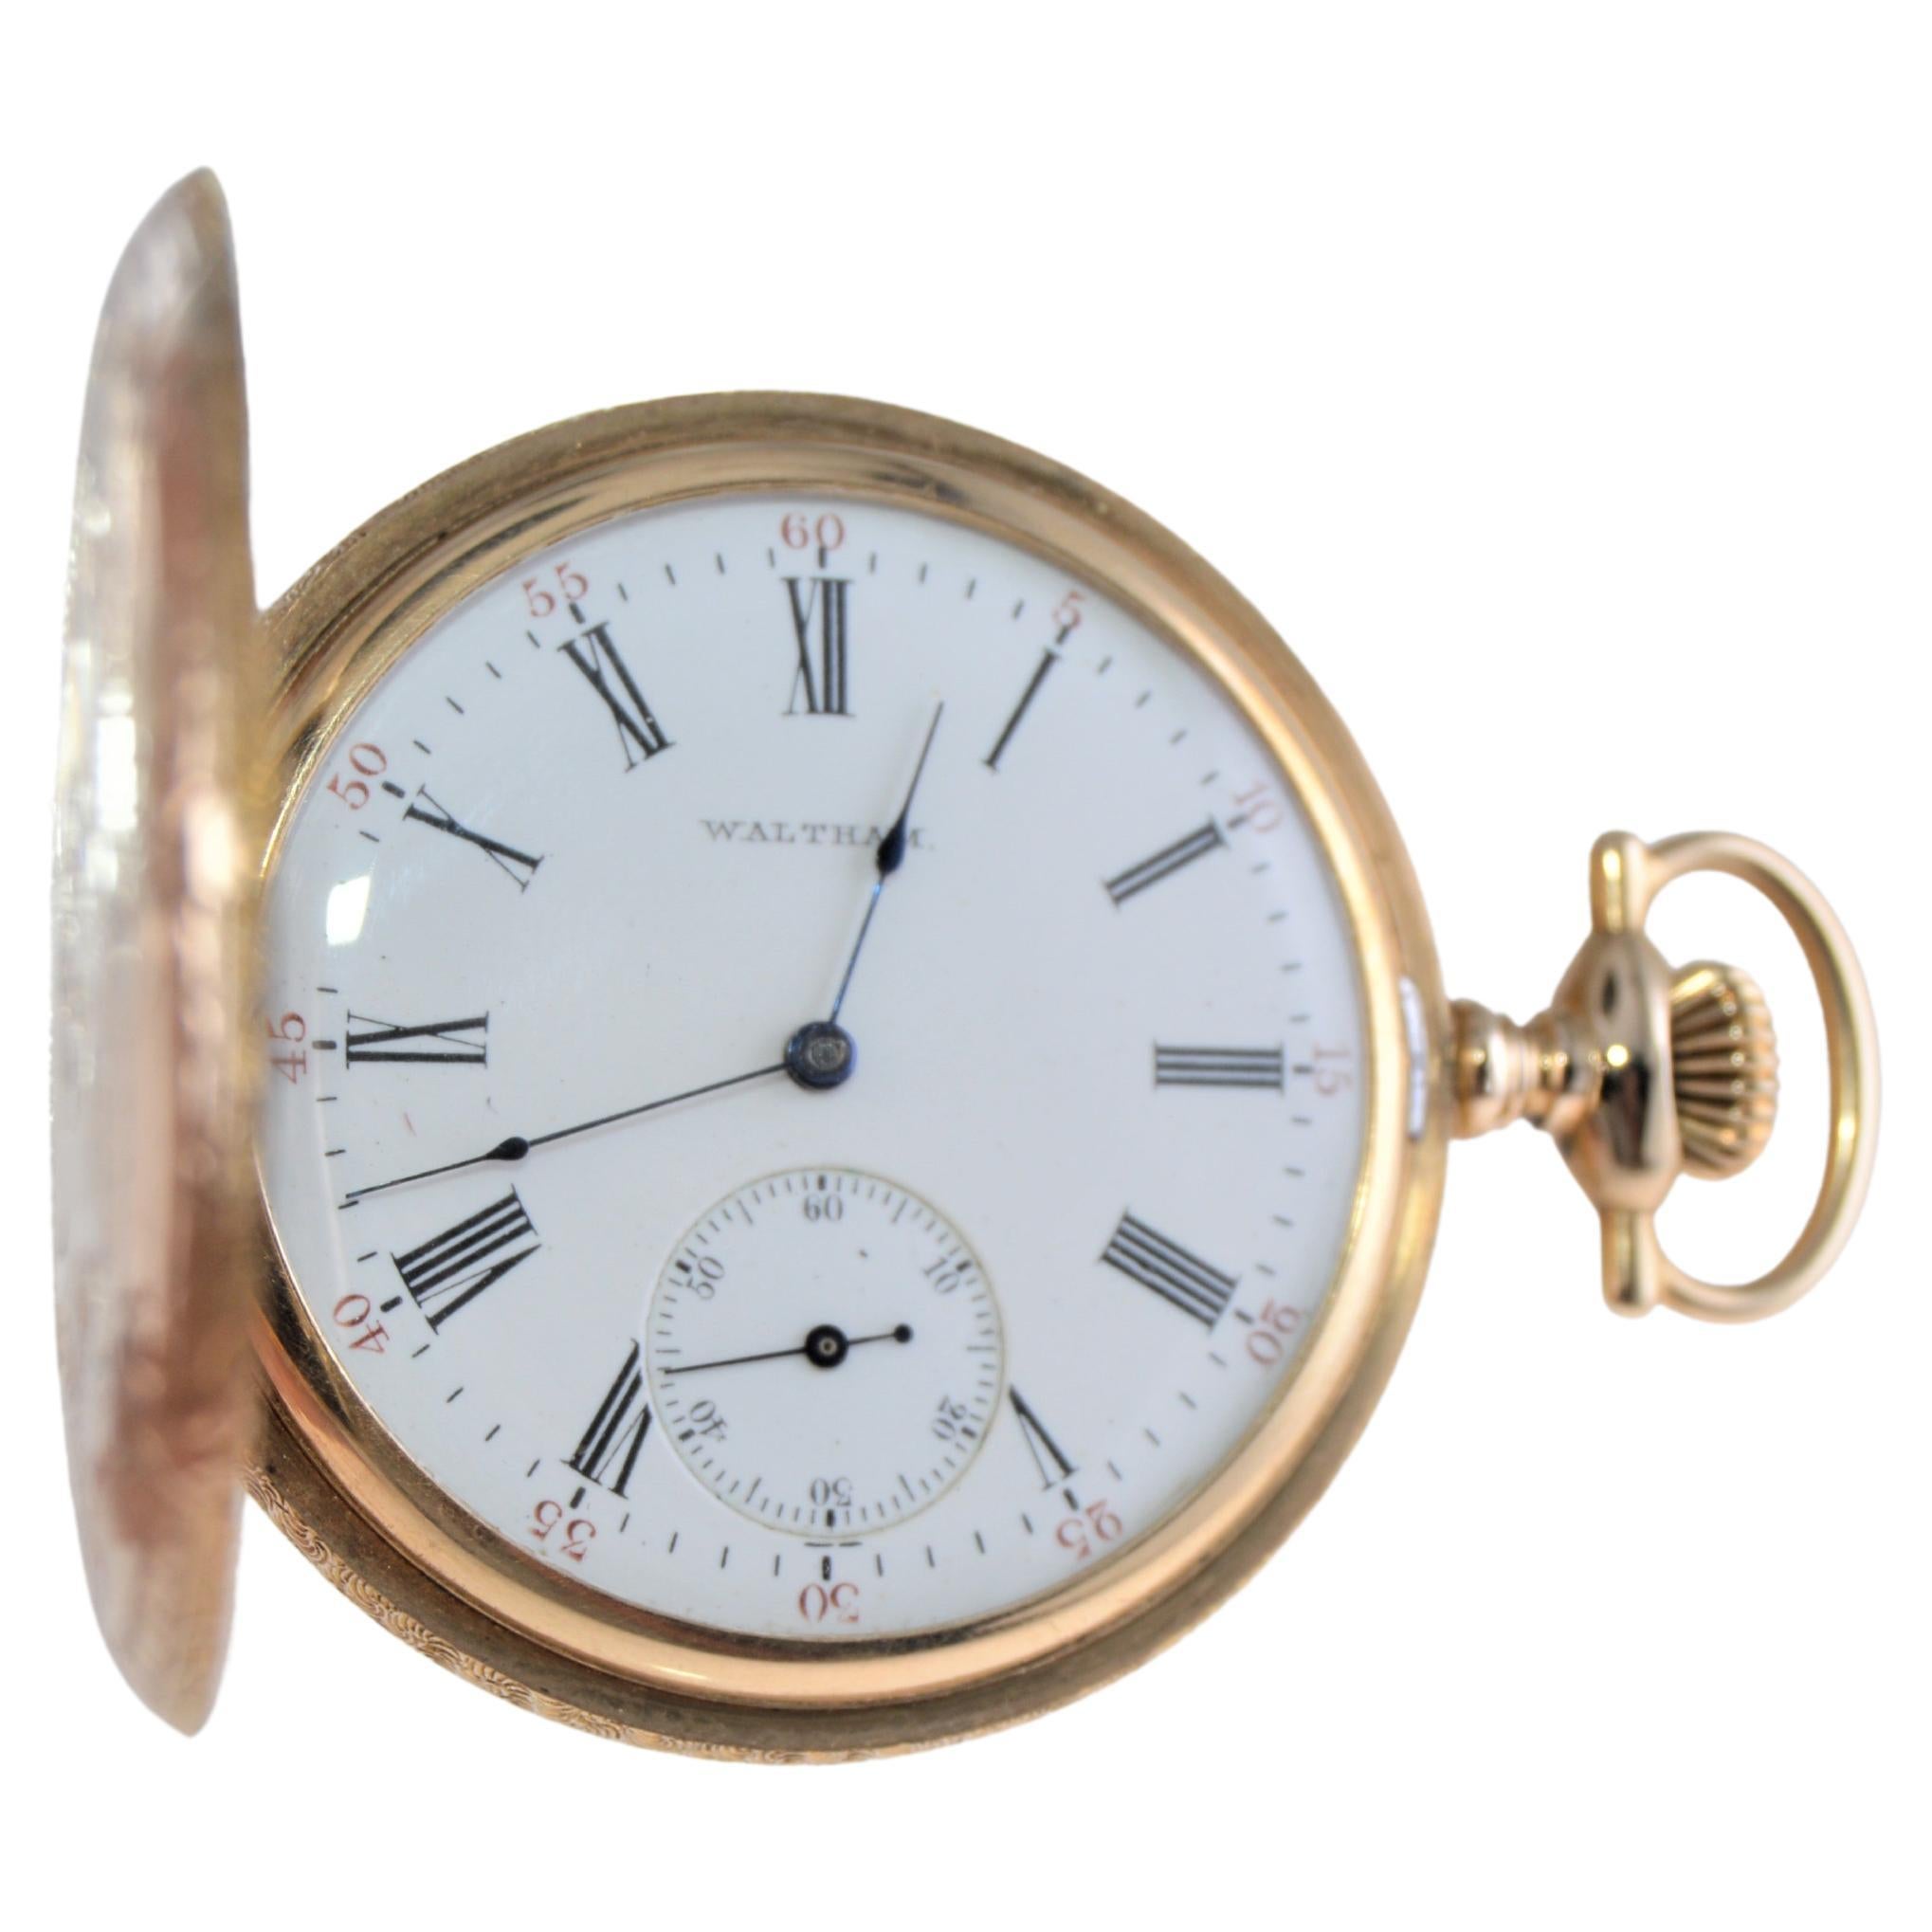 Waltham 14k Yellow Gold Hunters Cased Pocket Watch Circa 1900 Hand Engraved For Sale 4